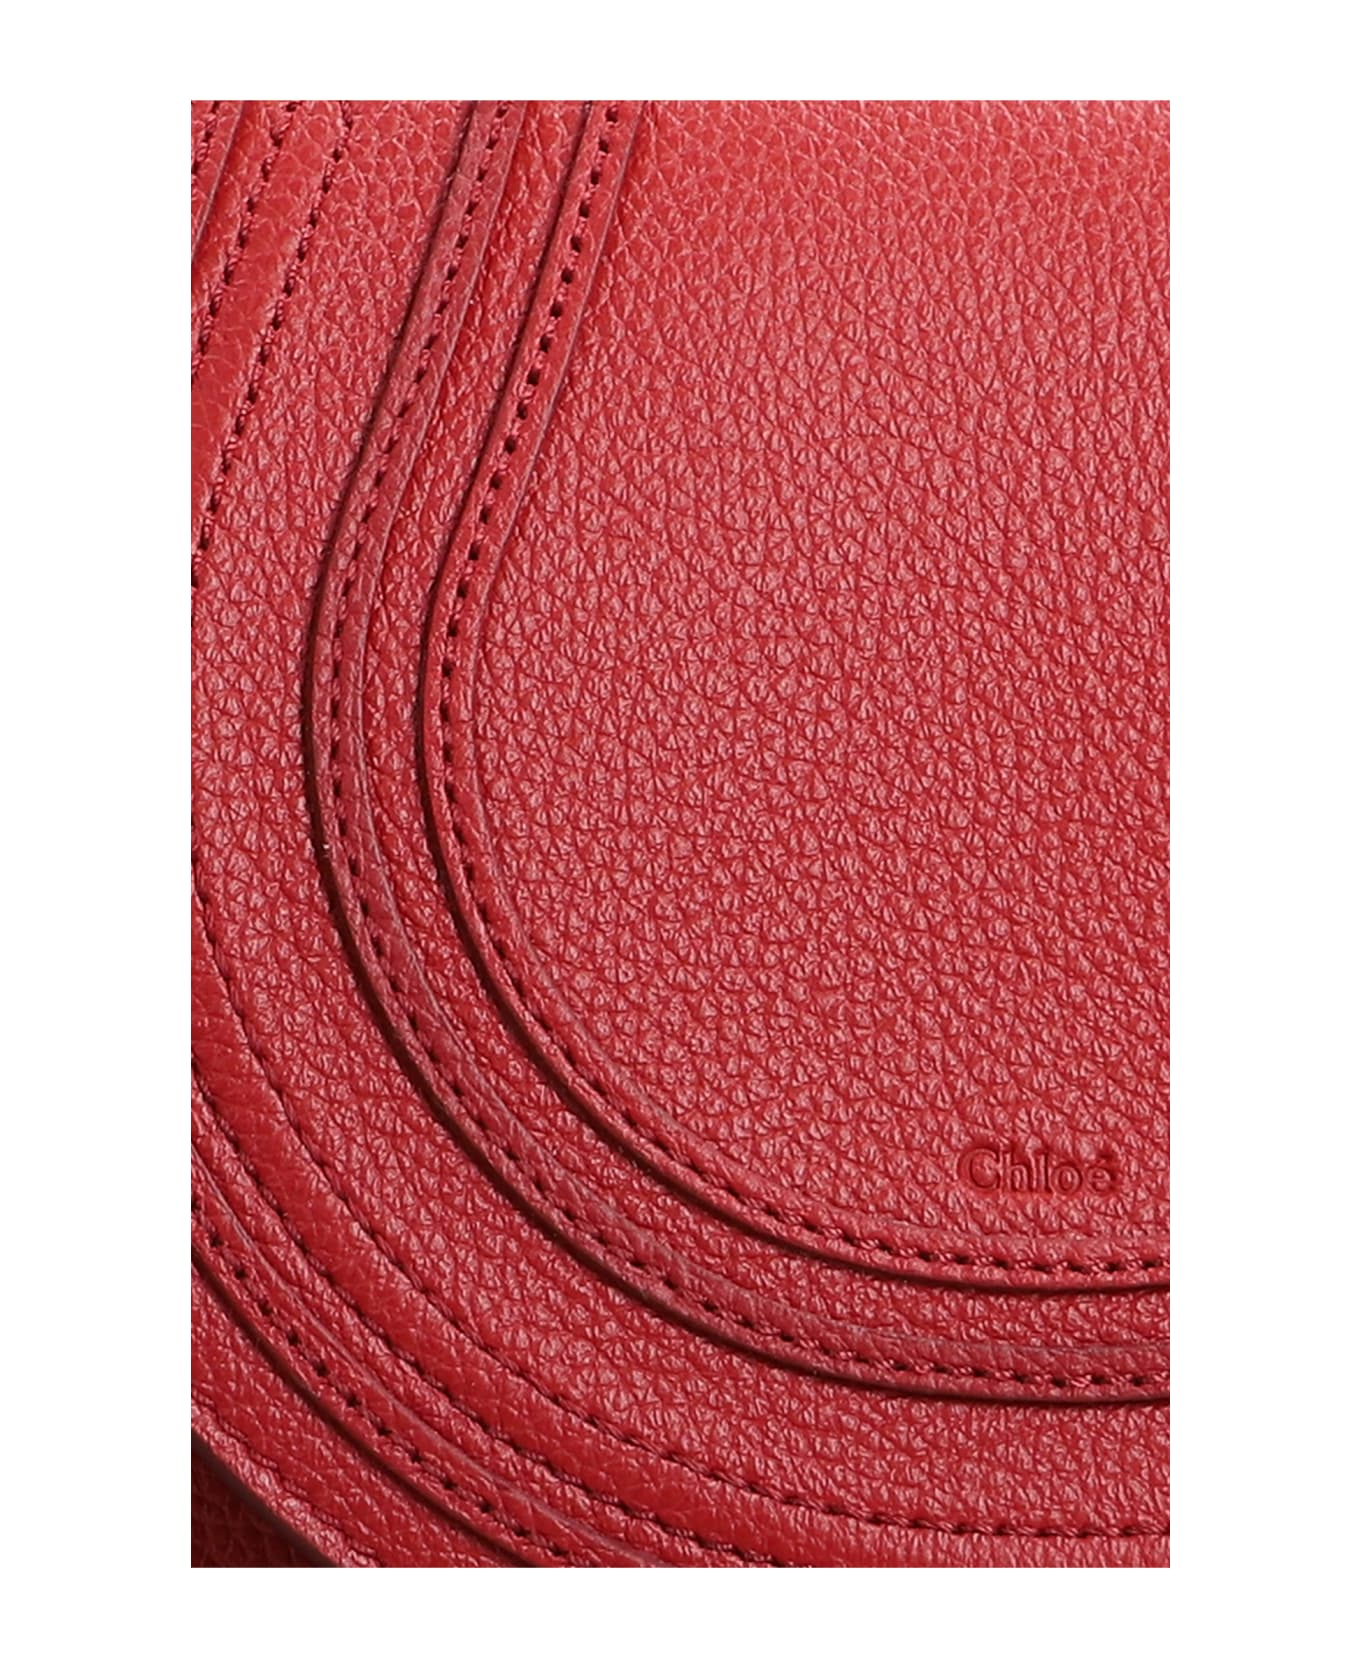 Chloé Marcie Shoulder Bag In Red Leather - red